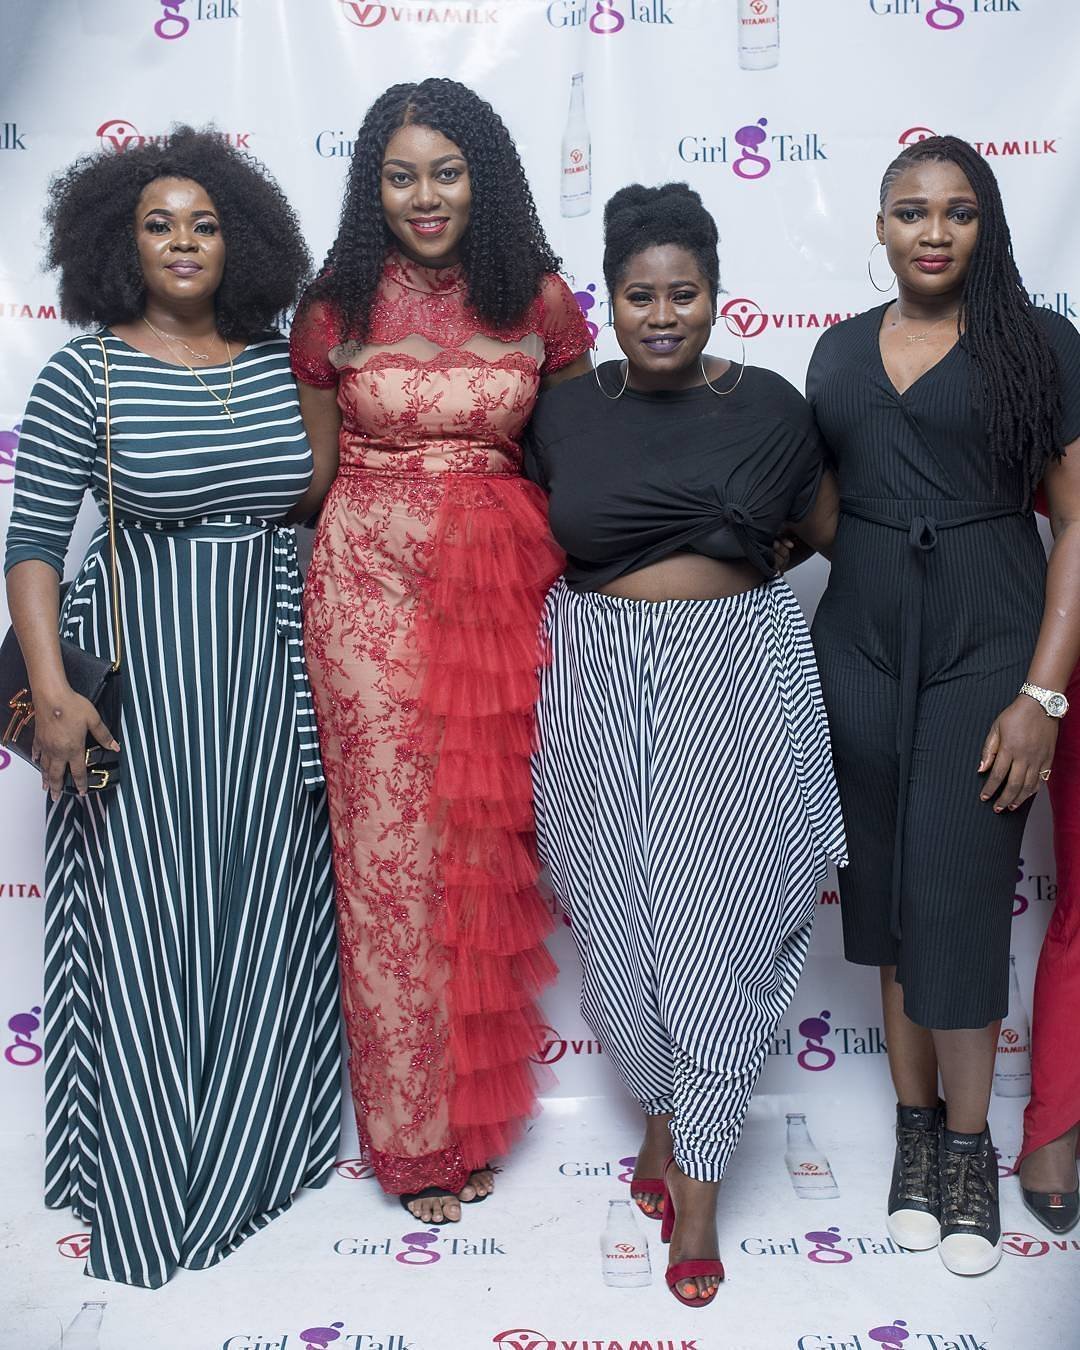 More Photos: What Your Favorite Celebs Wore To The 2017 Girl Talk Concert